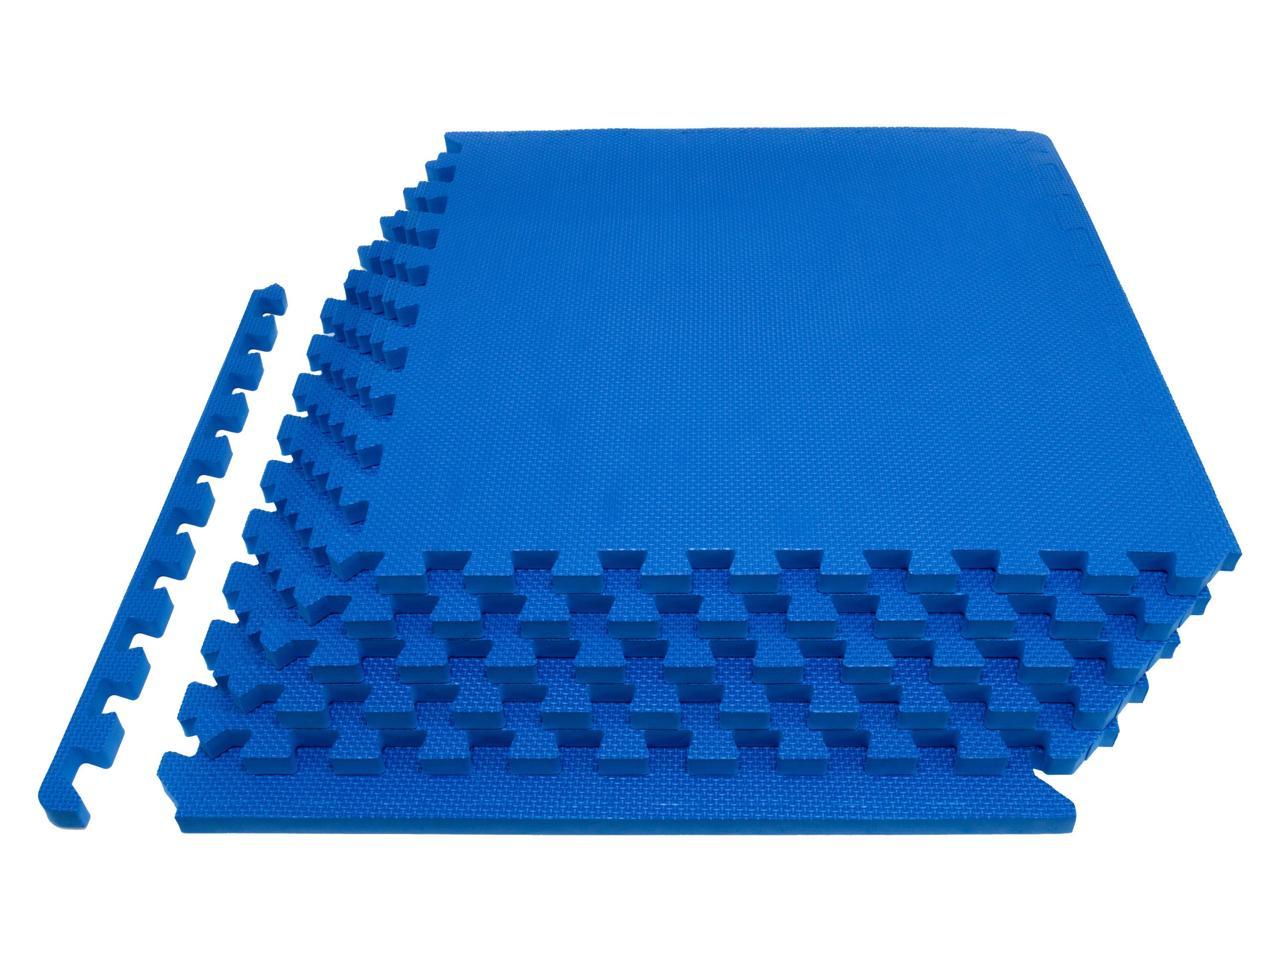 cushioned floor mats for exercise